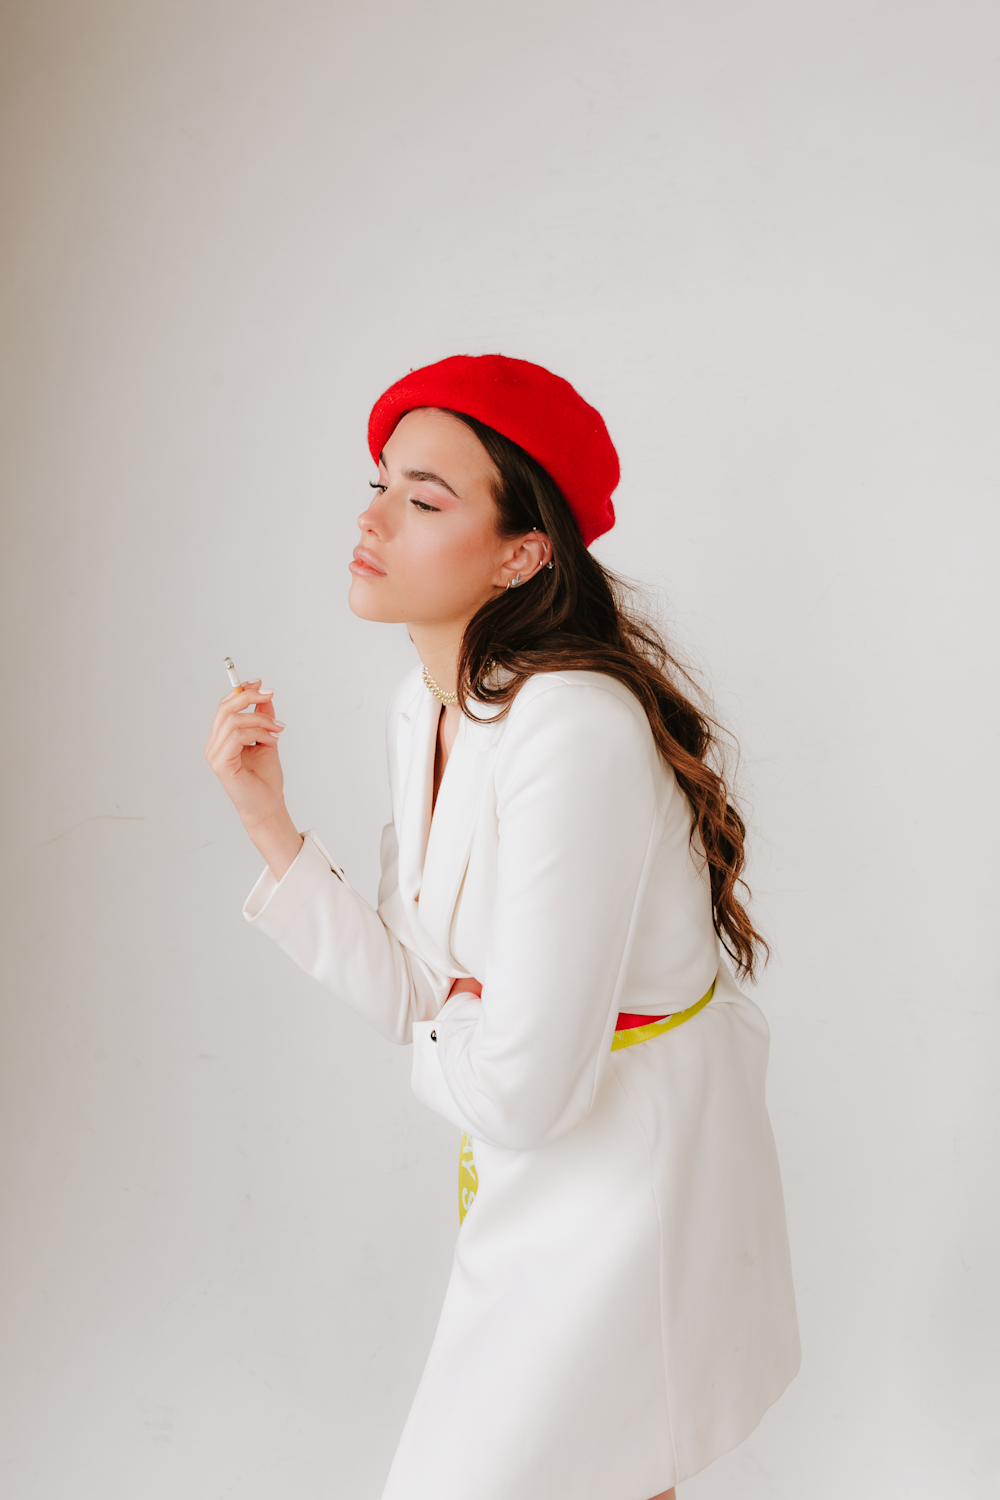 woman in white long sleeve shirt wearing red hat